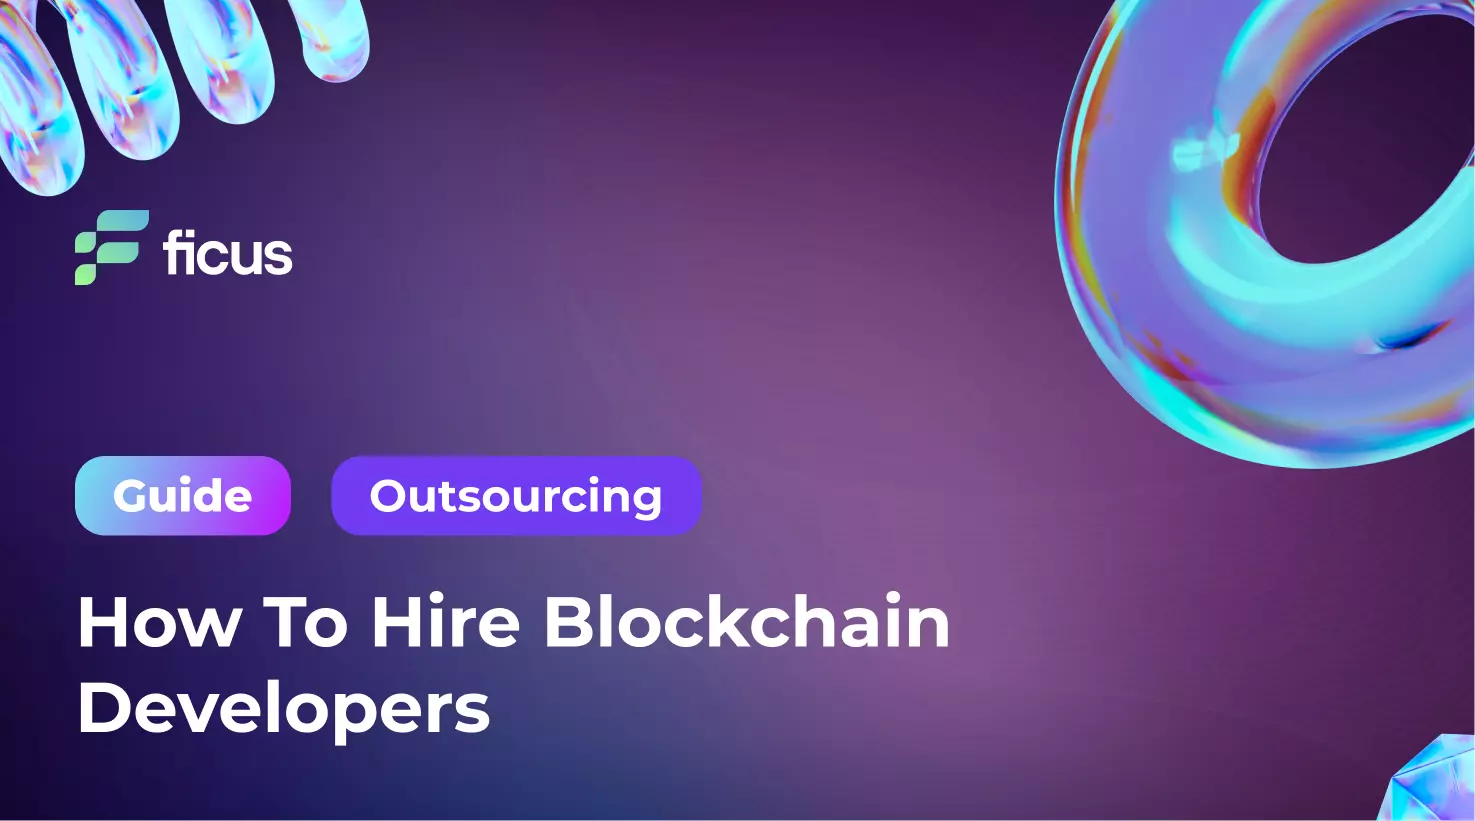 11_How To Hire Blockchain Developers